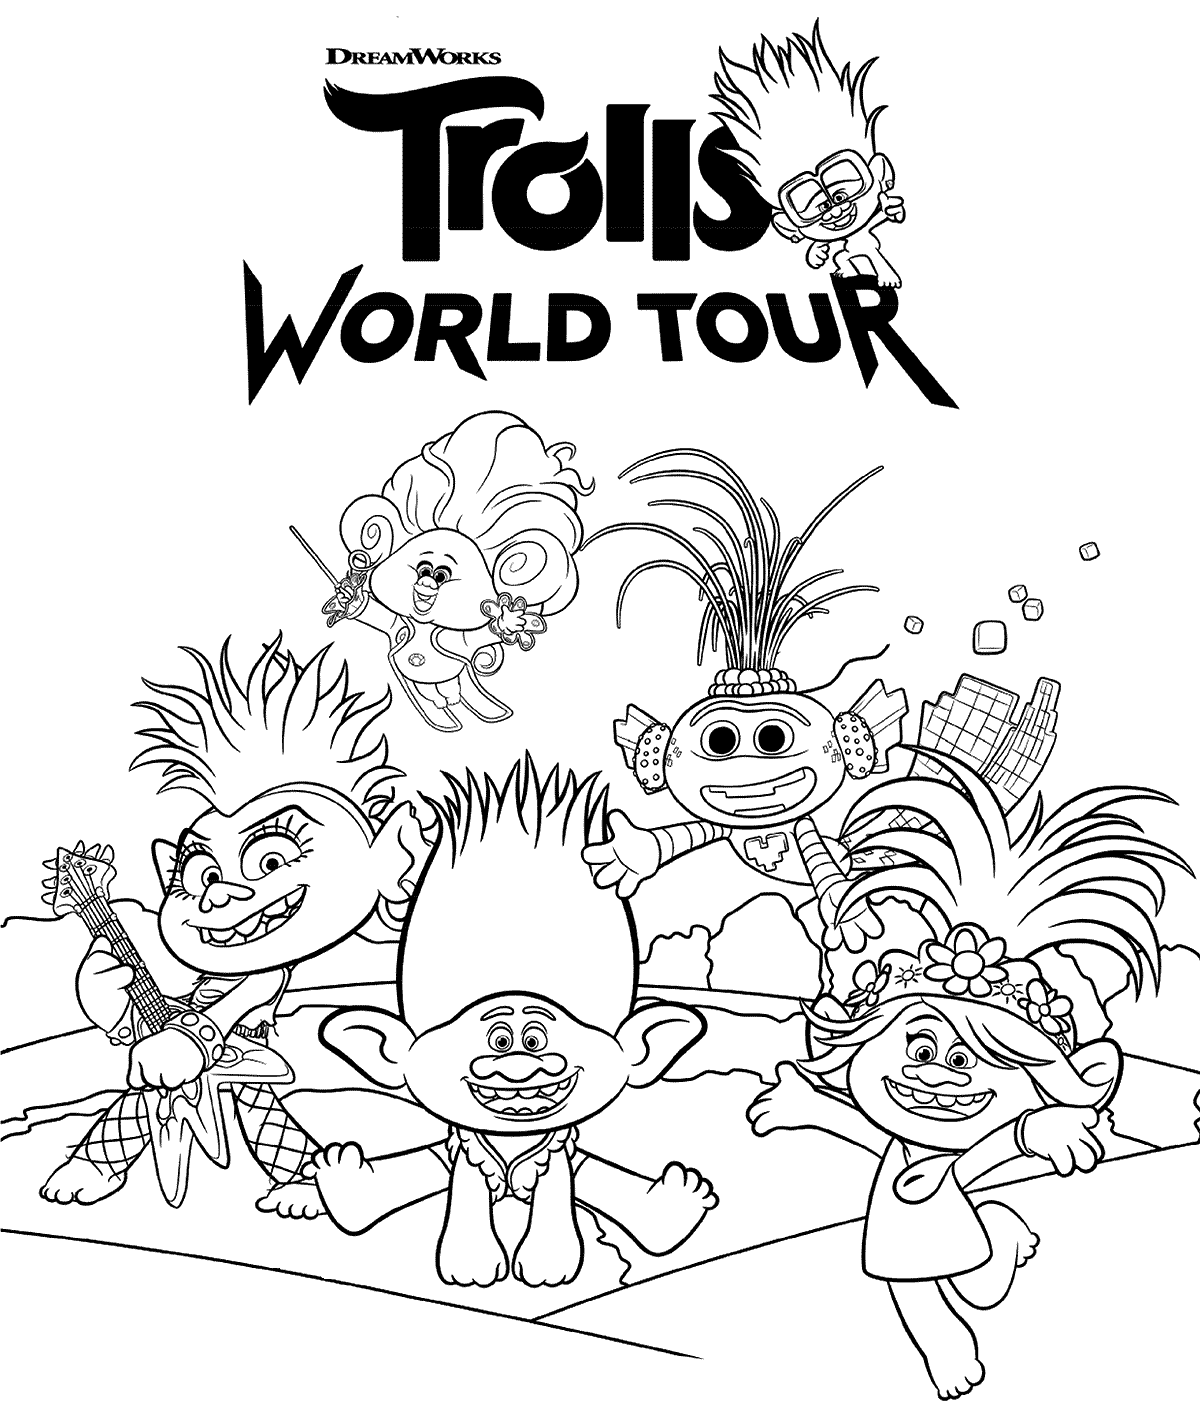 DreamWorks Trolls 2 World Tour Coloring Page